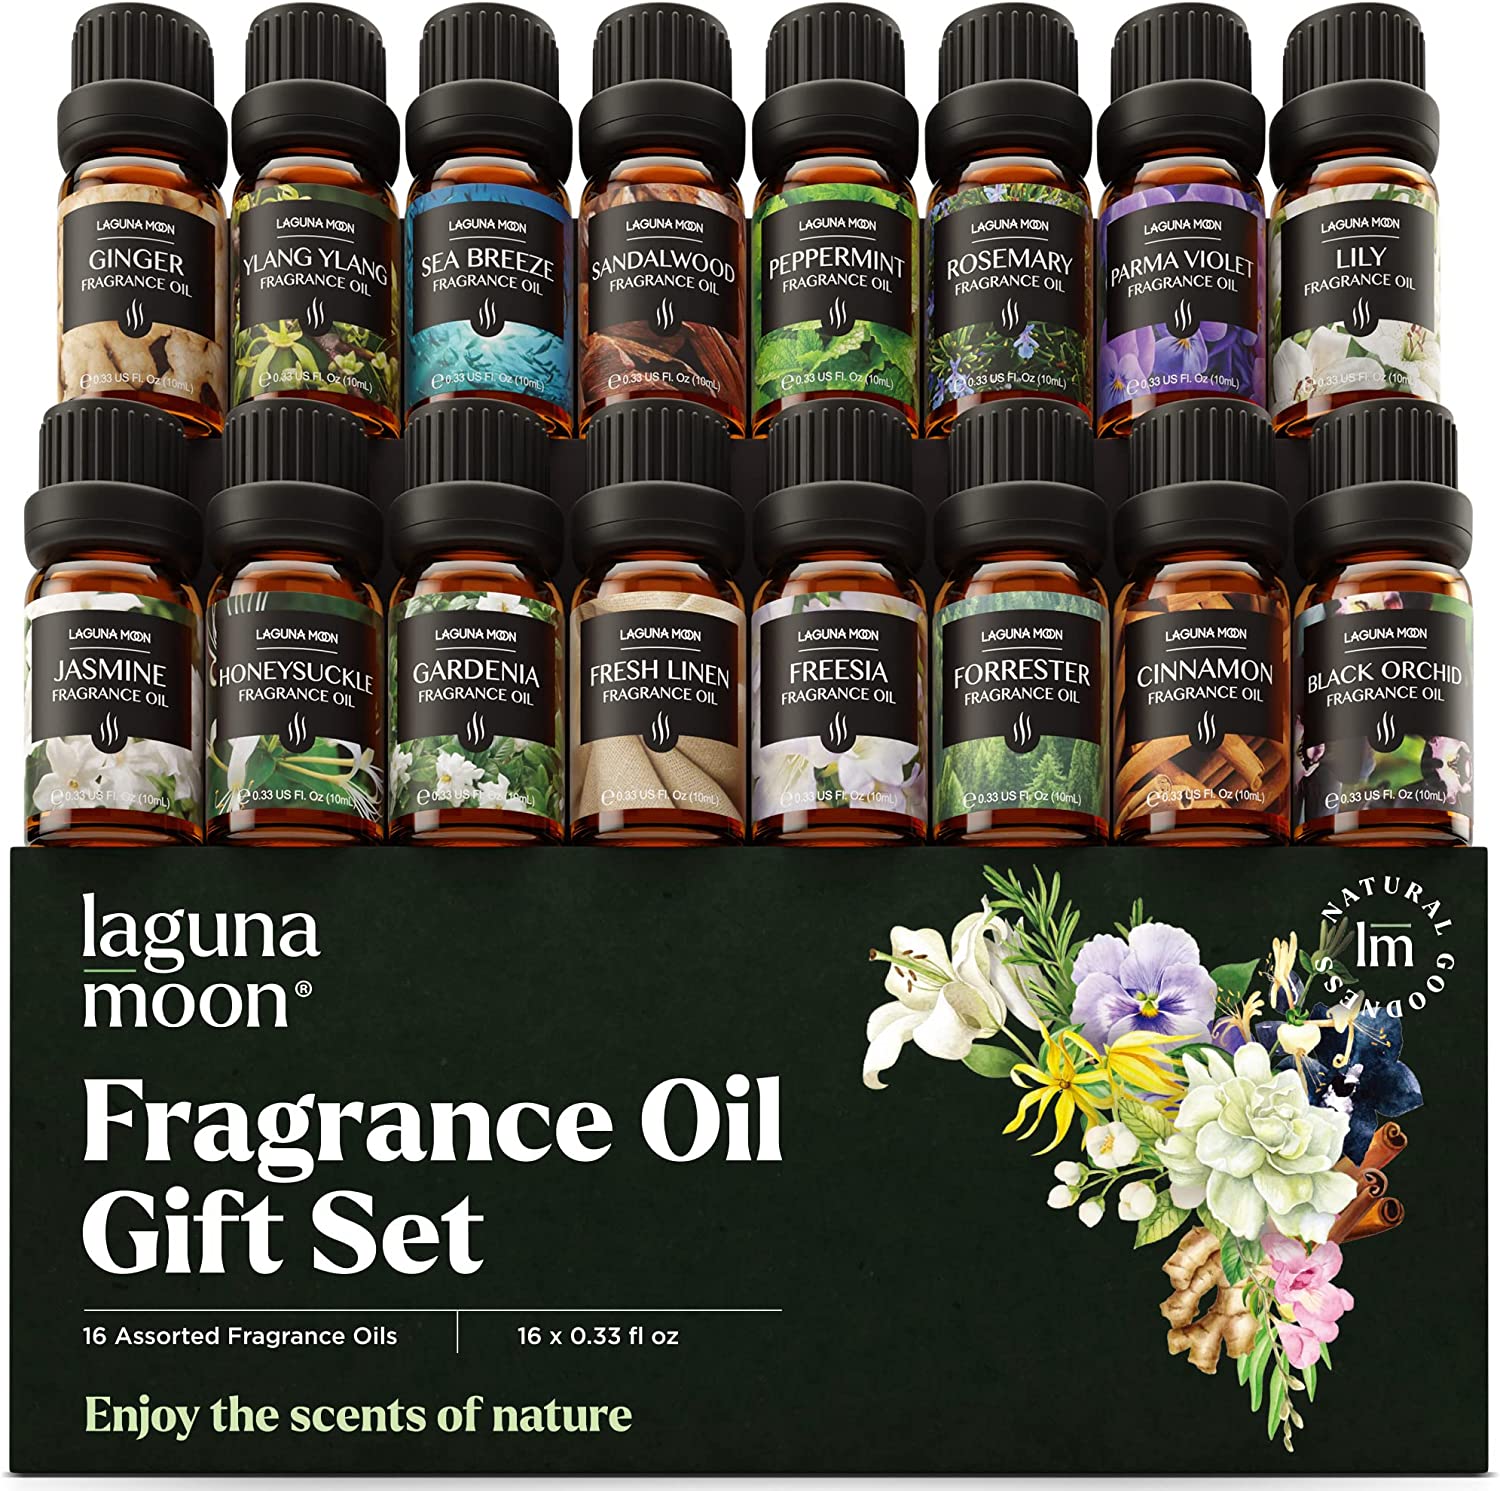 Moonlight Path Fragrance Oil by Eclectic Lady, 10 mL, Premium Grade Fragrance Oil